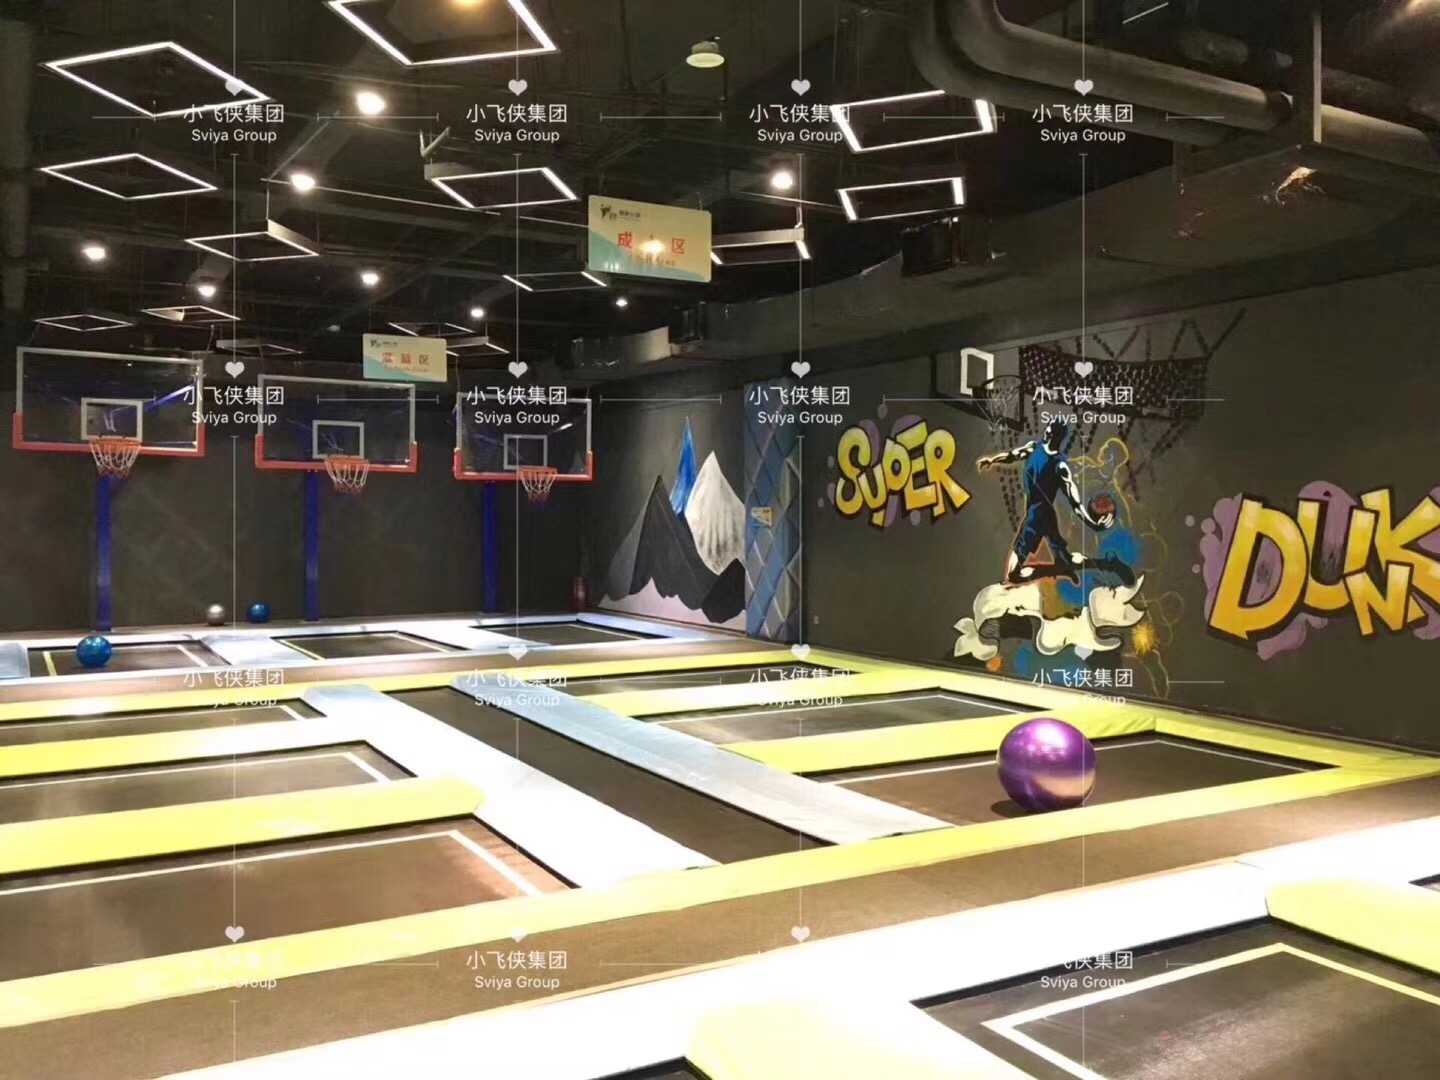 Come An Amazing Time At This Newly Built Trampoline Park